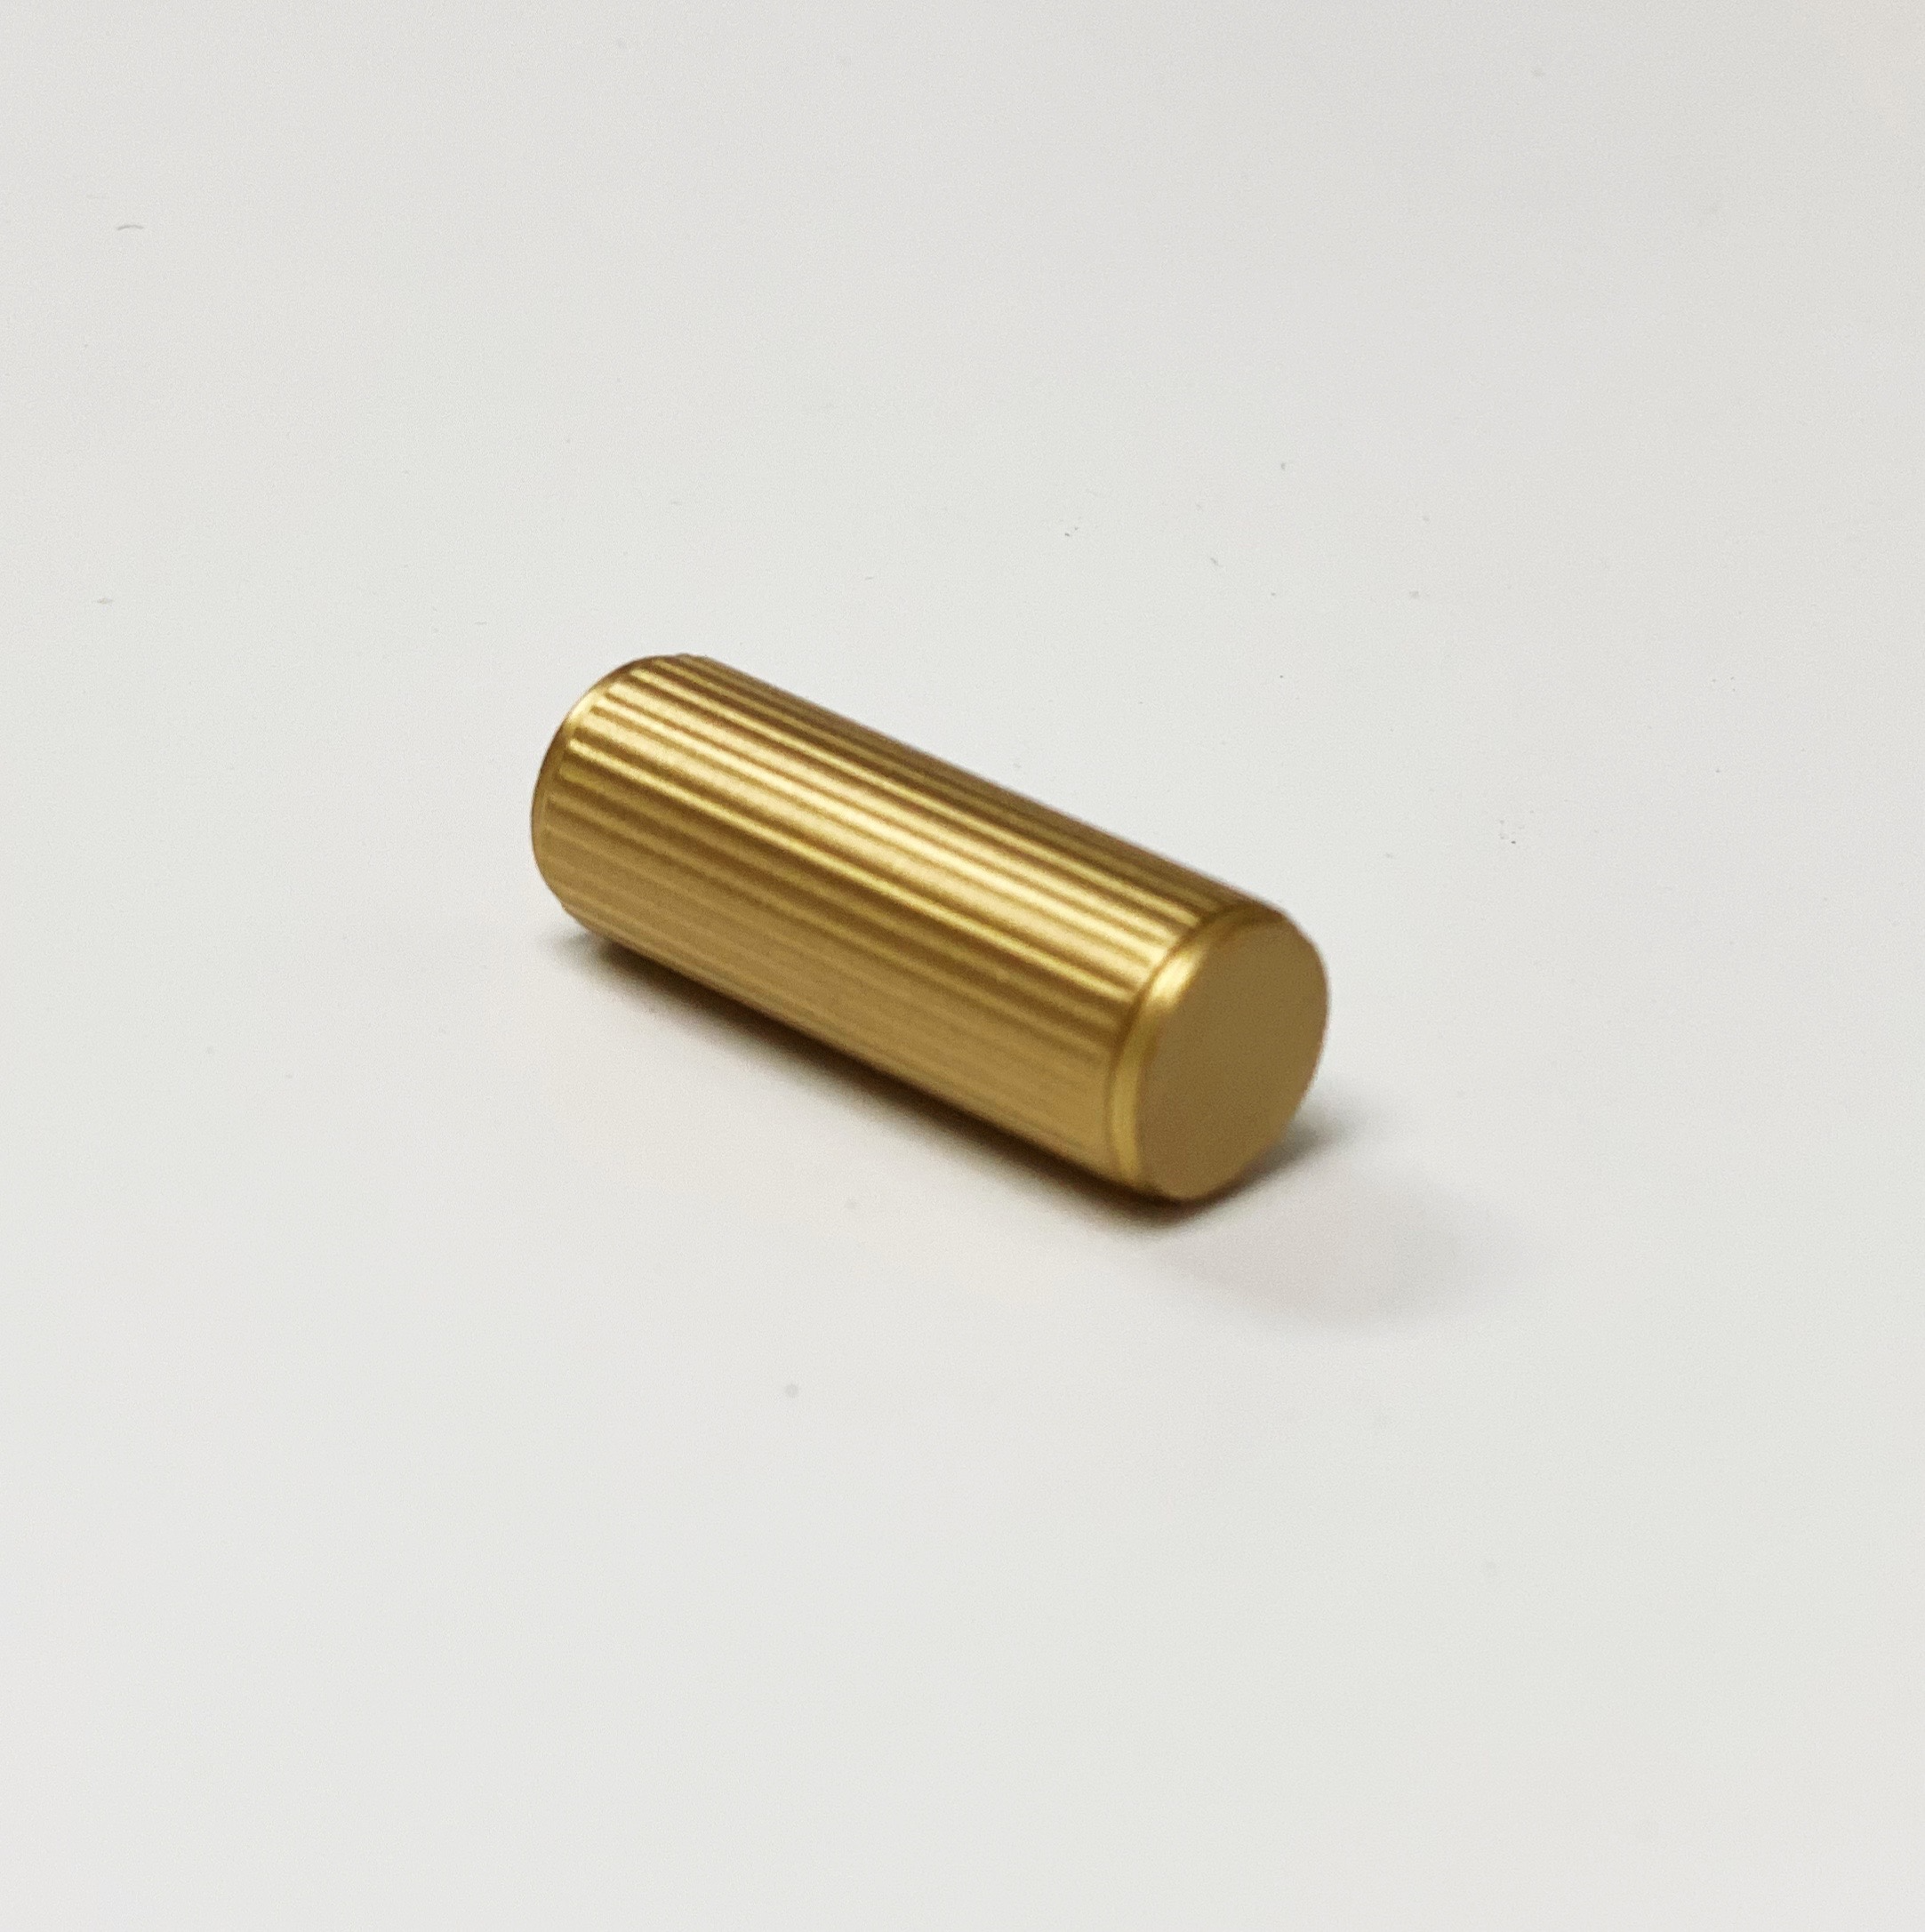 Brass Solid "Texture Lines" Knurled Drawer Pulls and Knobs in Satin Brass | Pulls